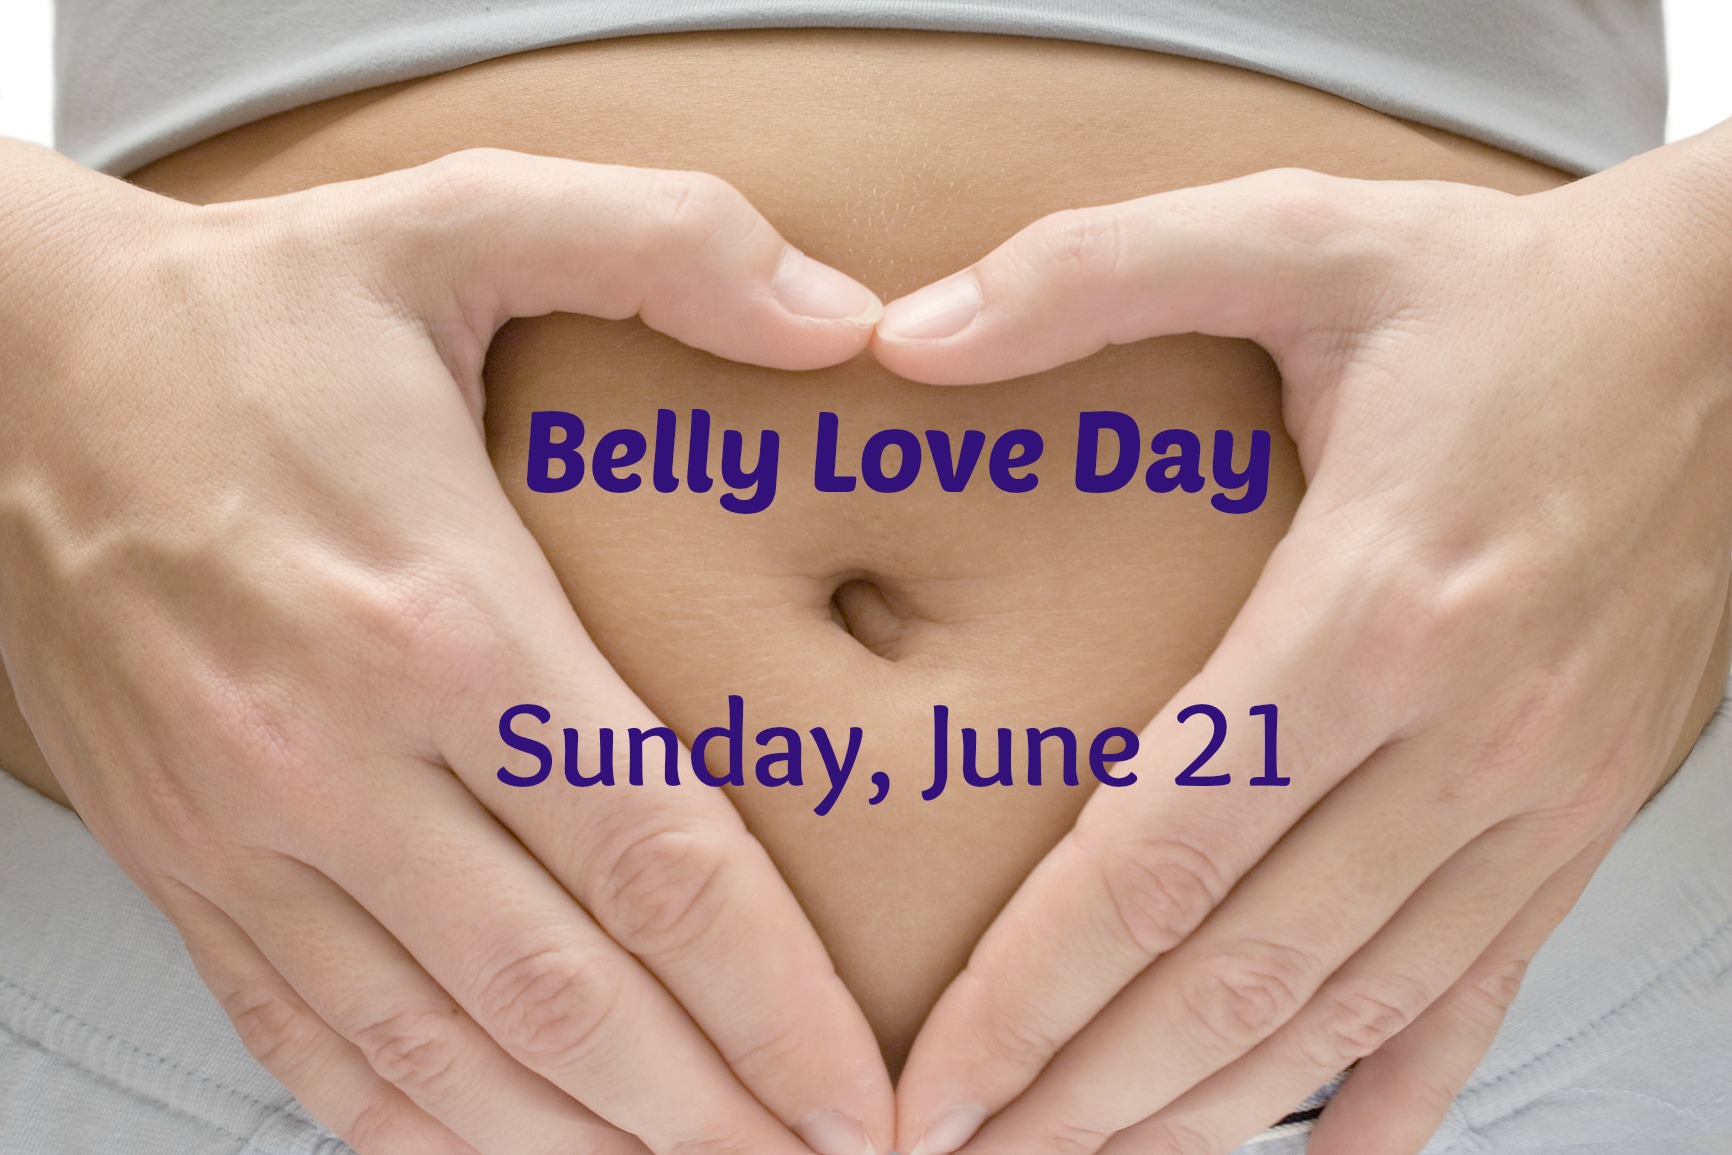 Celebrate Belly Love Day on June 21